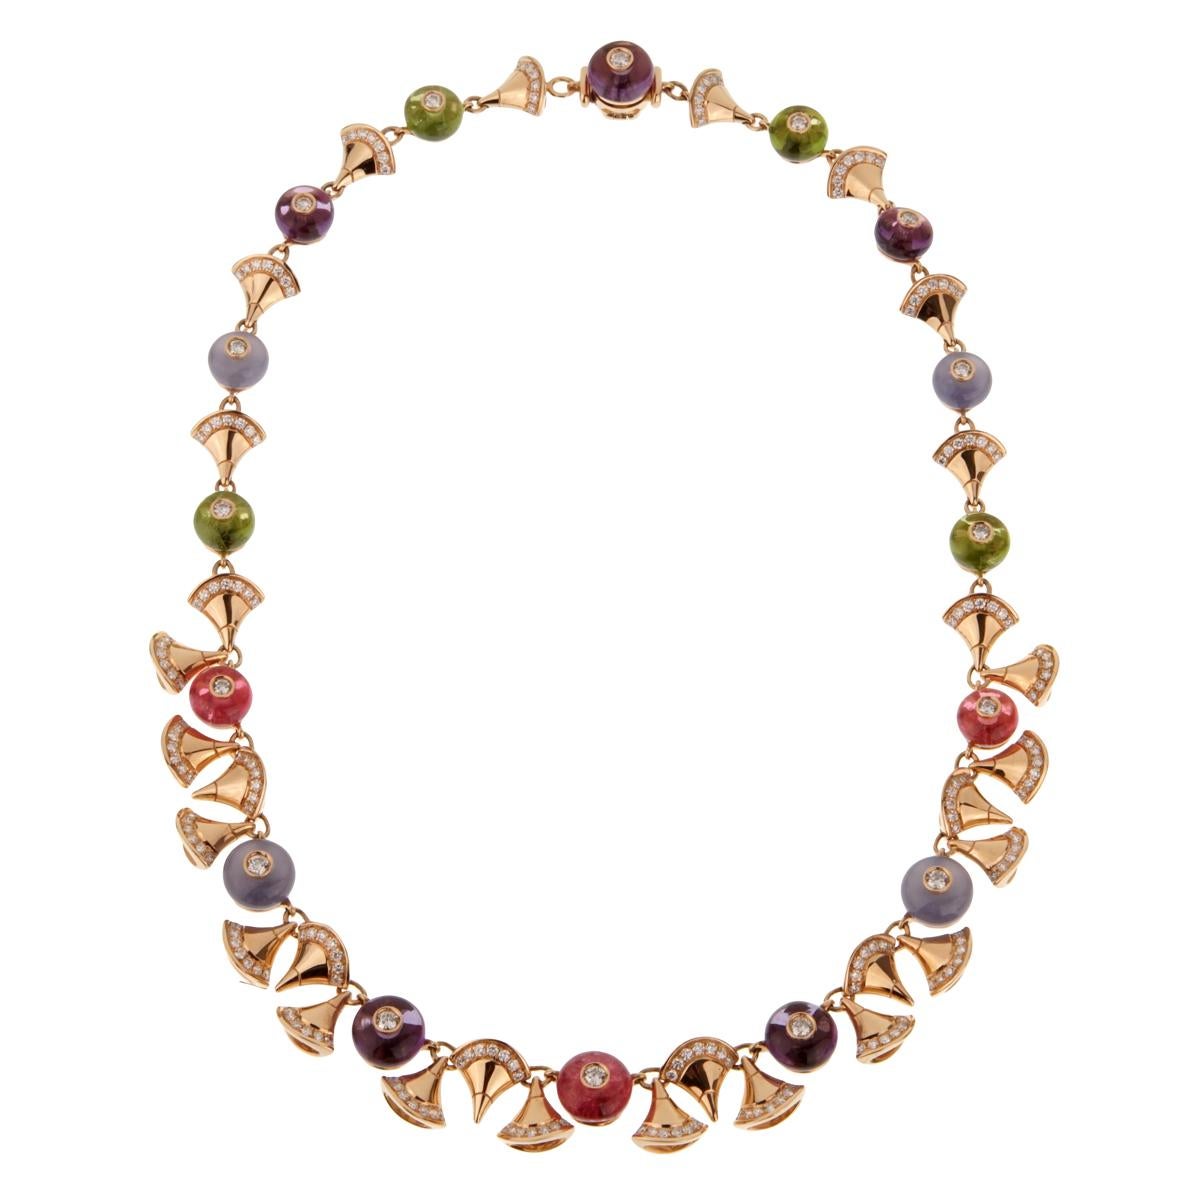 A magnificent Bulgari Divas Dream necklace adorned with 13.7ct Amethyst, Peridot totaling 11.45 carats, Rubellite totaling 8.90 carats, and round chalcedony totaling 10.80 carats. 
The diamonds total 3.45ct of the finest Bulgari round brilliant cut